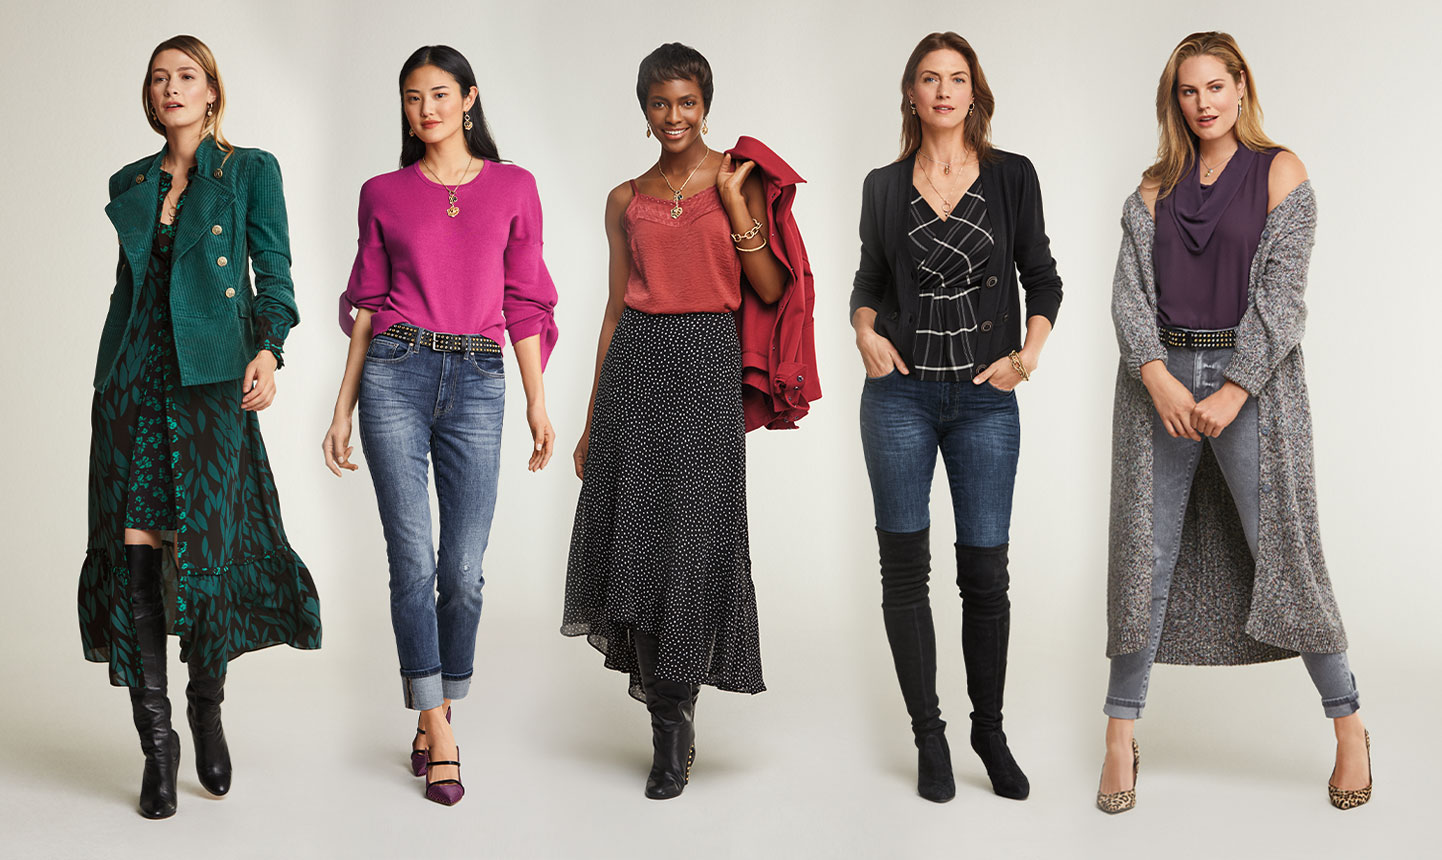 Cabi - Fall 2020 Look Book - Page 1